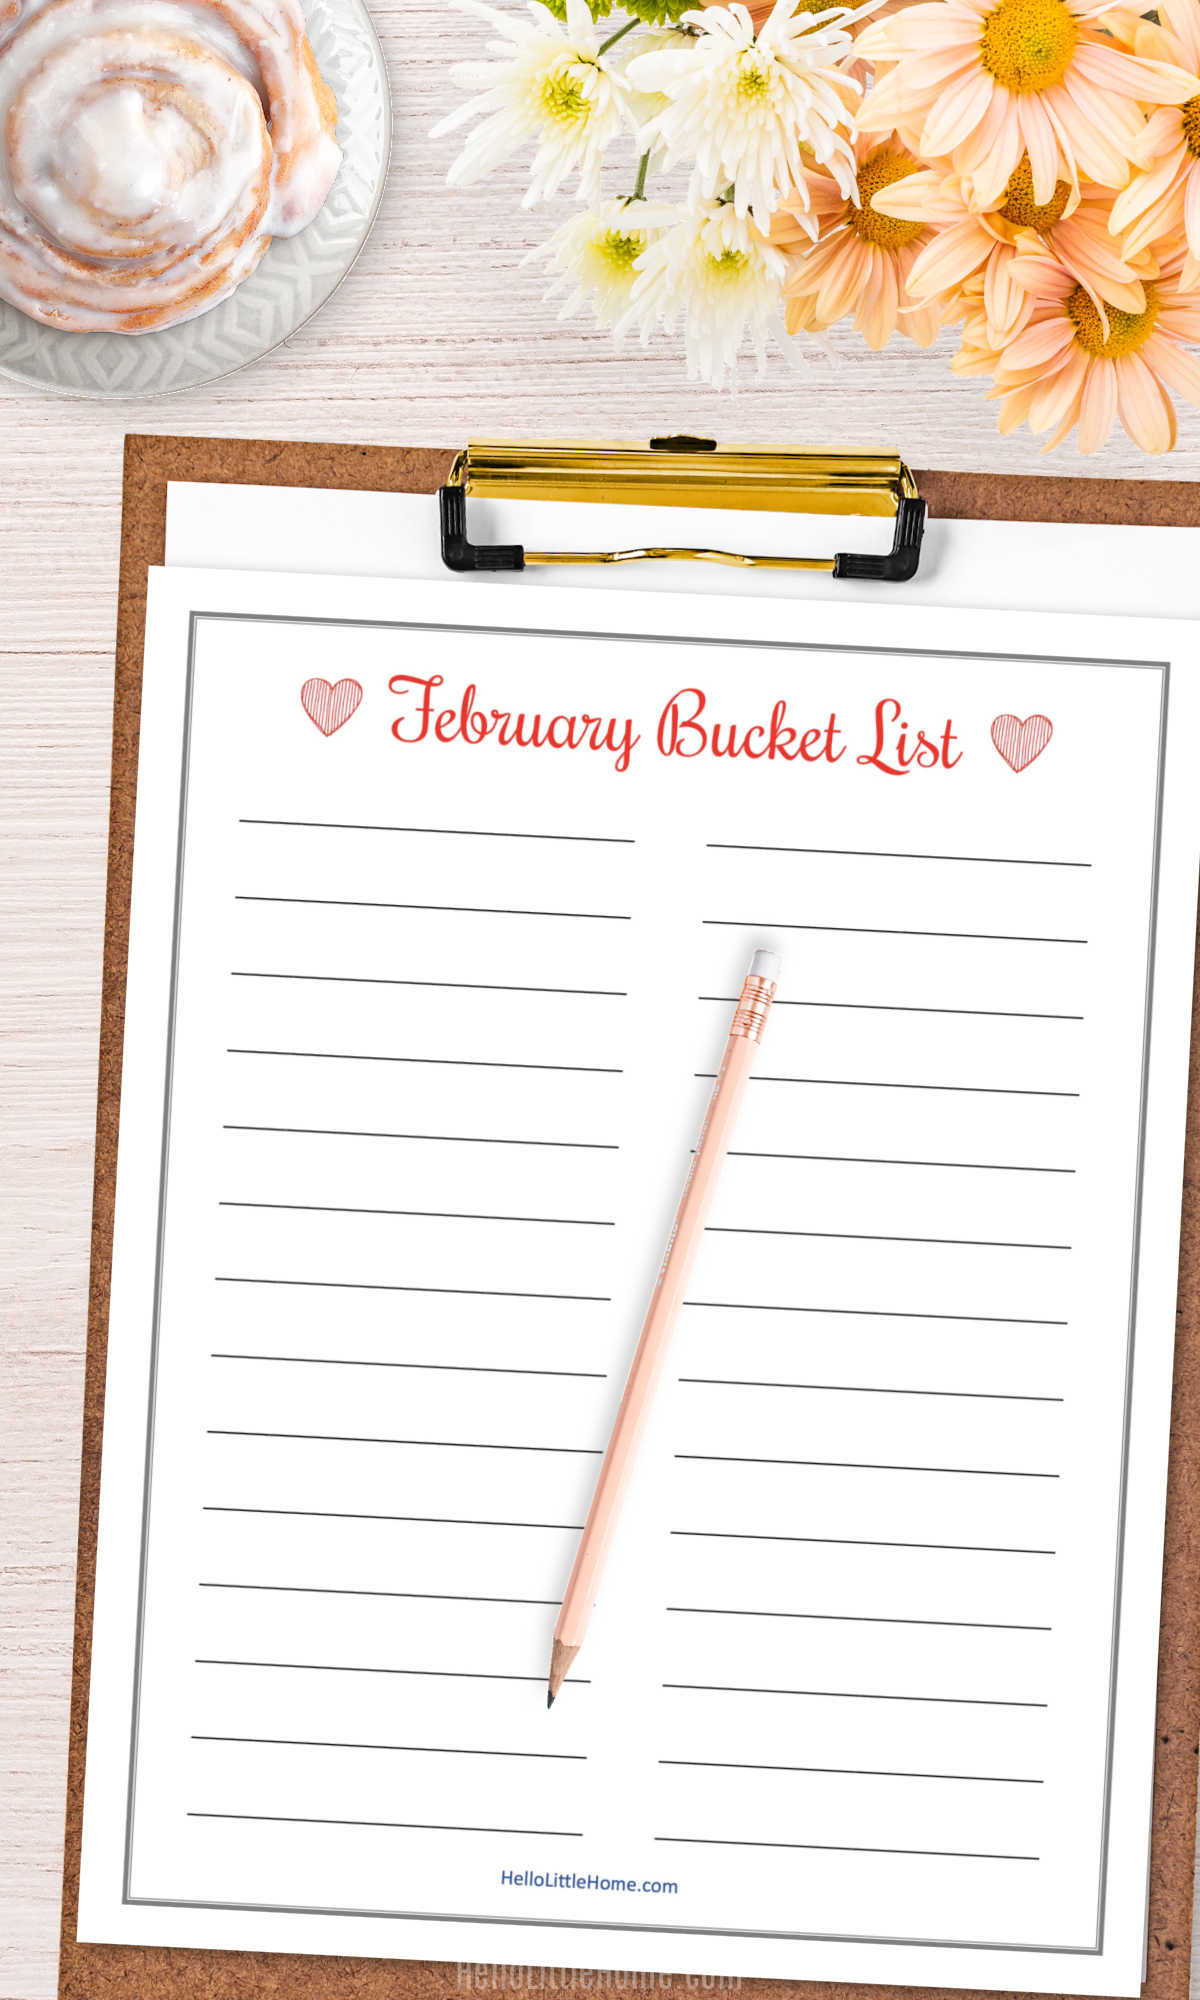 The blank list for things to do in February on a clipboard.